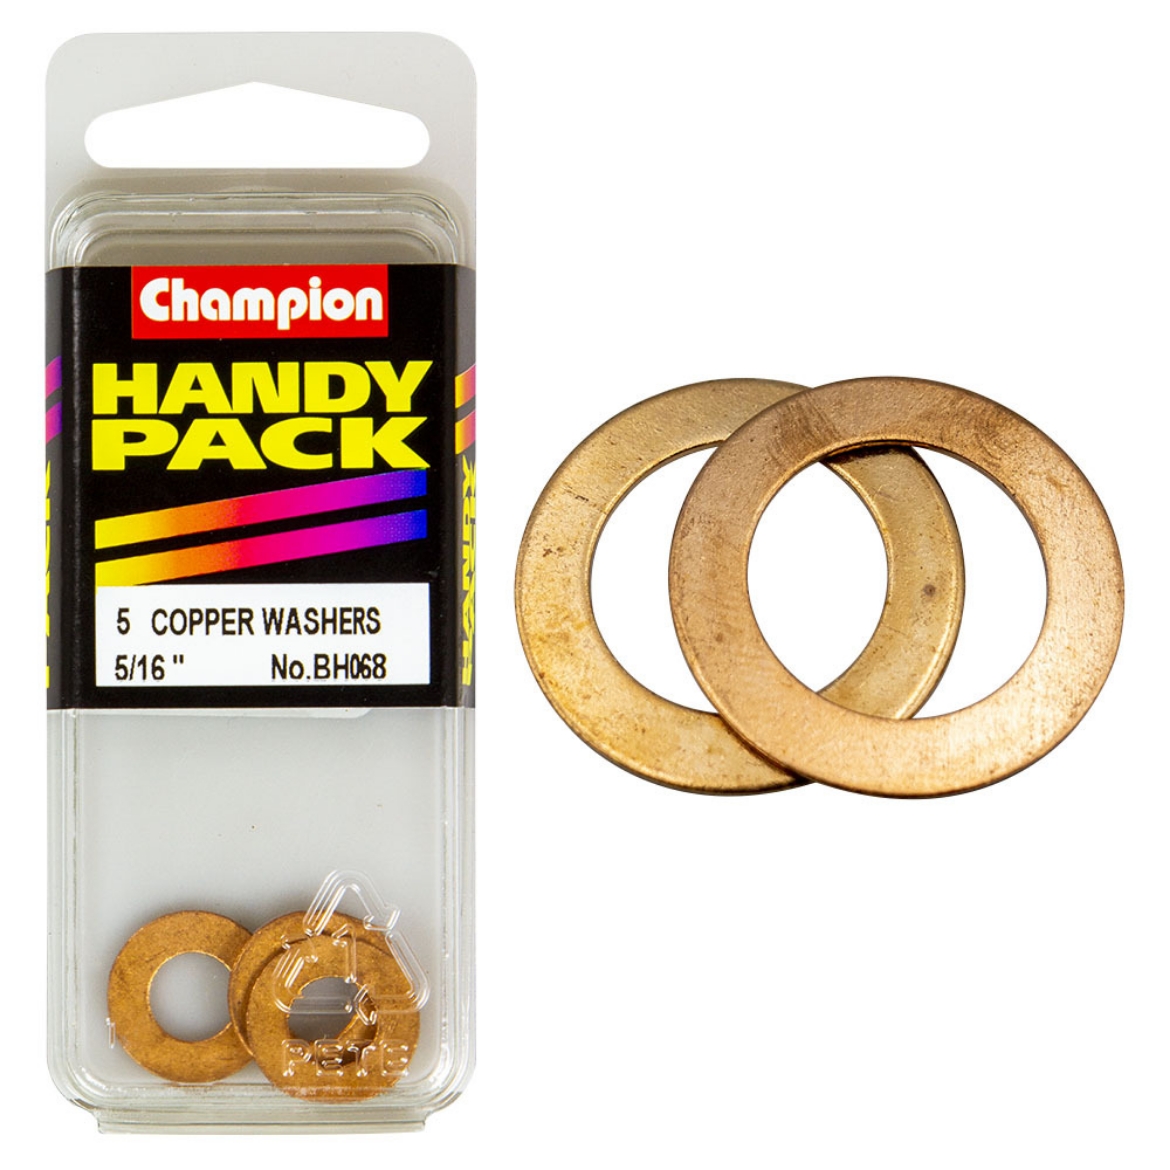 Picture of Handy Pk Copper Washers 20g 5/16x5/8 CWC (Pkt.5)